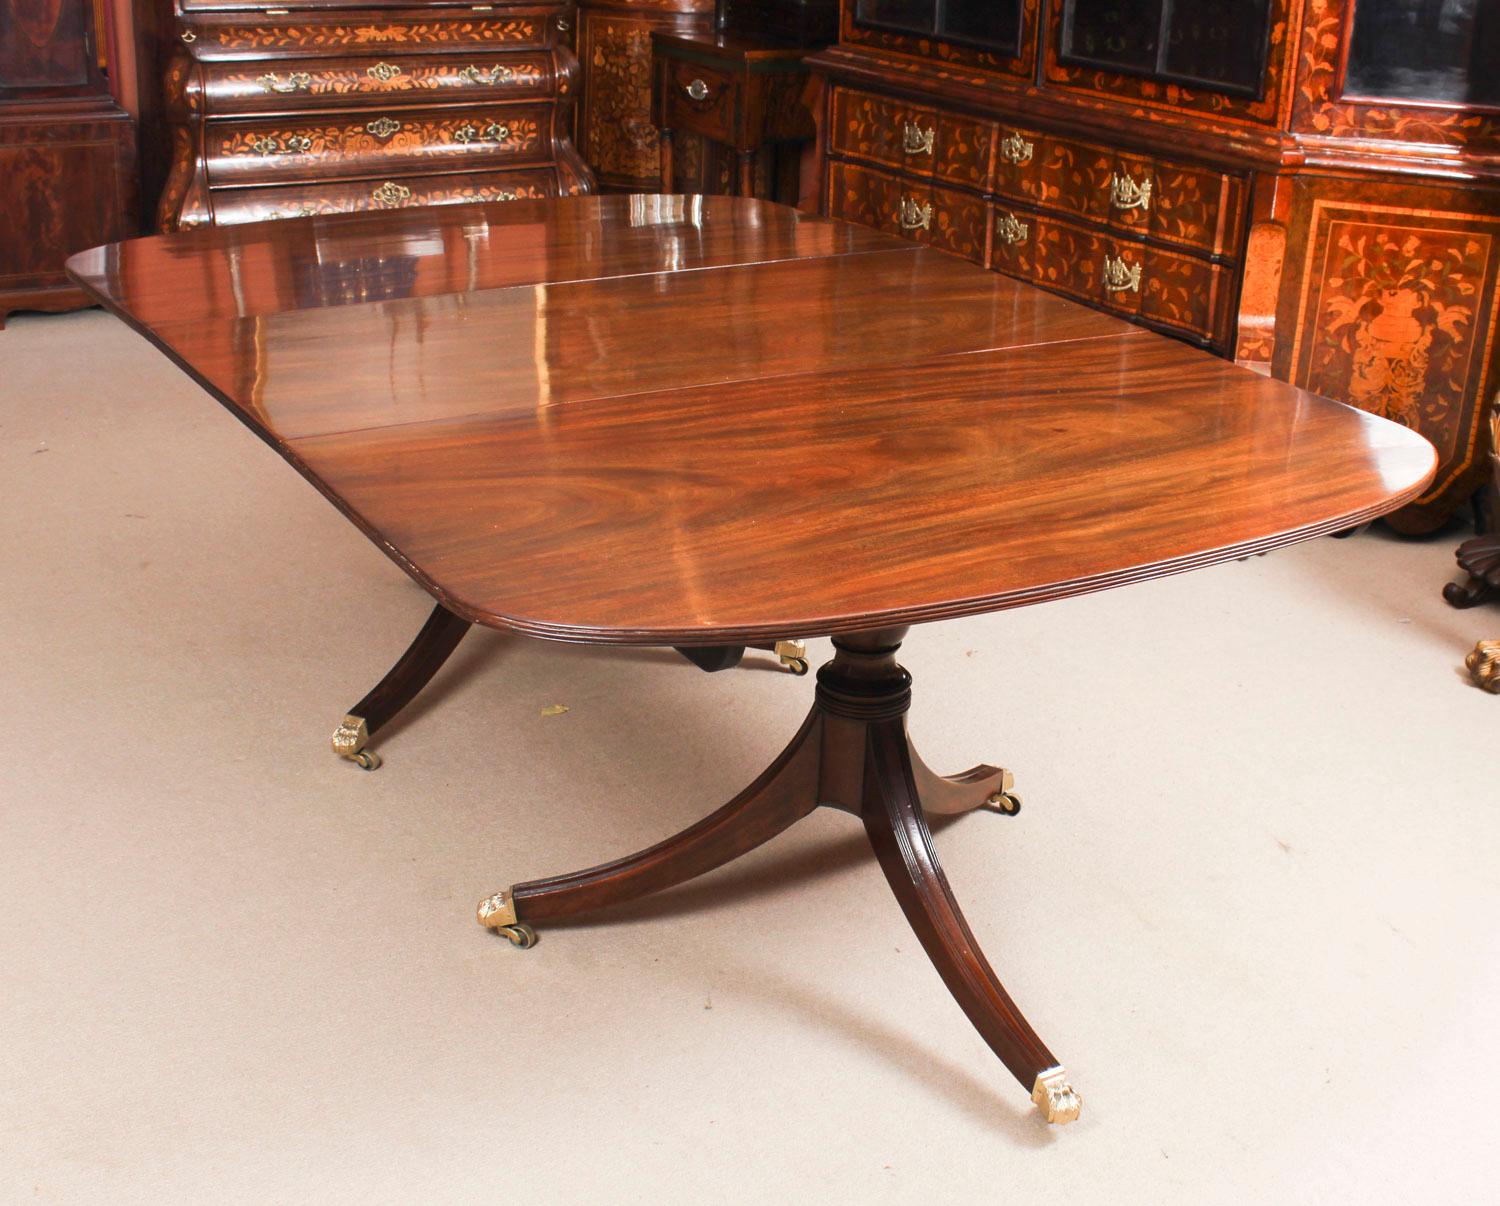 This is an elegant antique George III Regency dining table, dating from circa 1820.

The table has one additional leaf and is raised on twin 